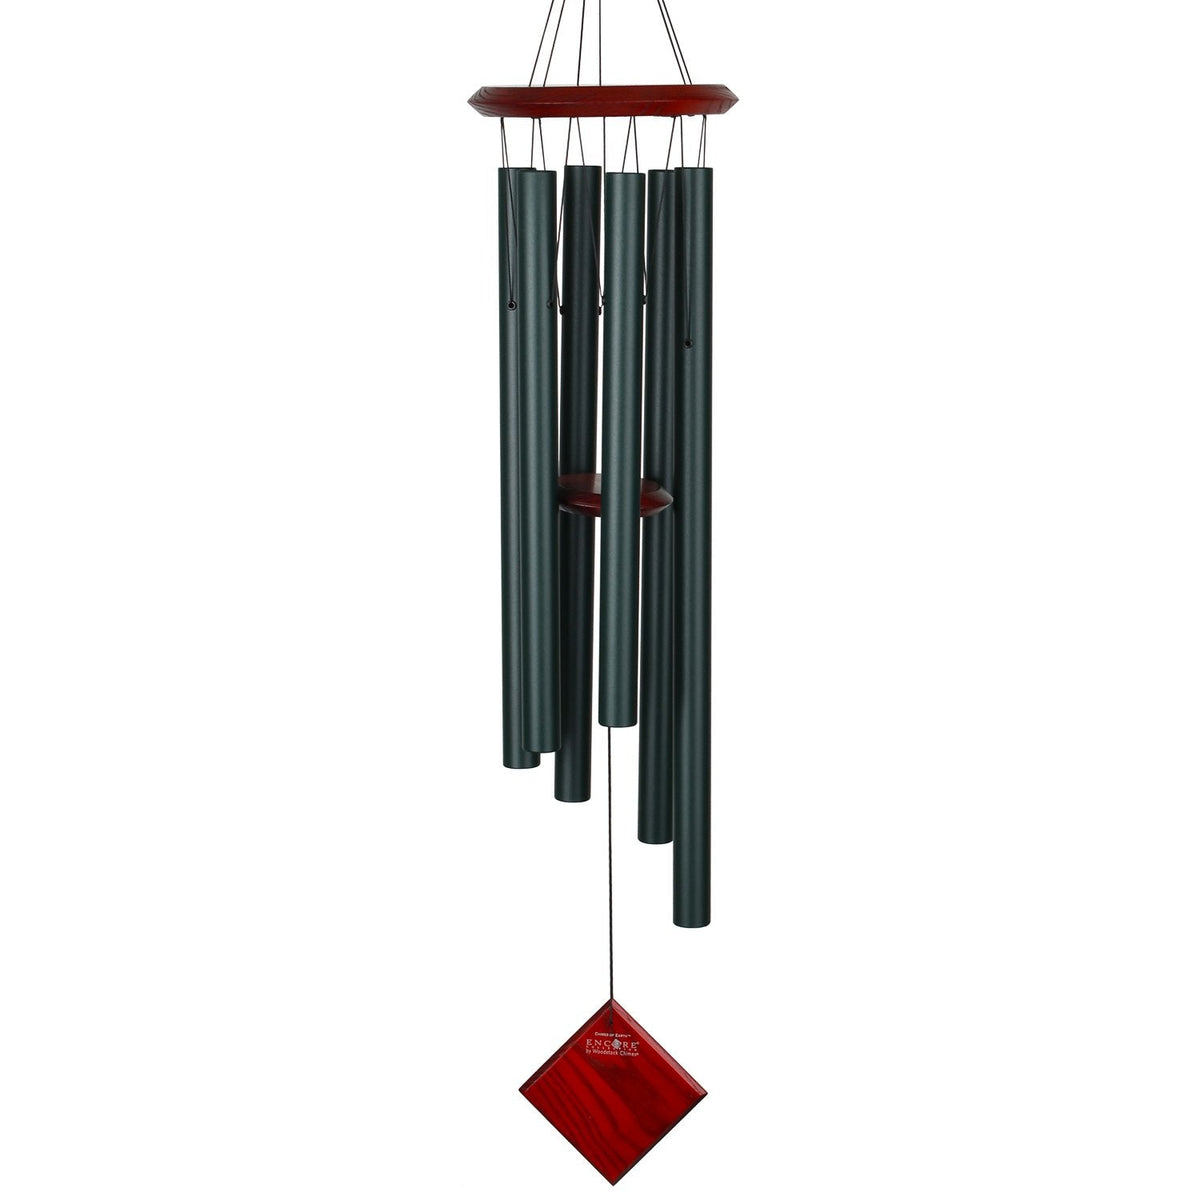 Encore Chimes of Earth Evergreen by Woodstock Chimes